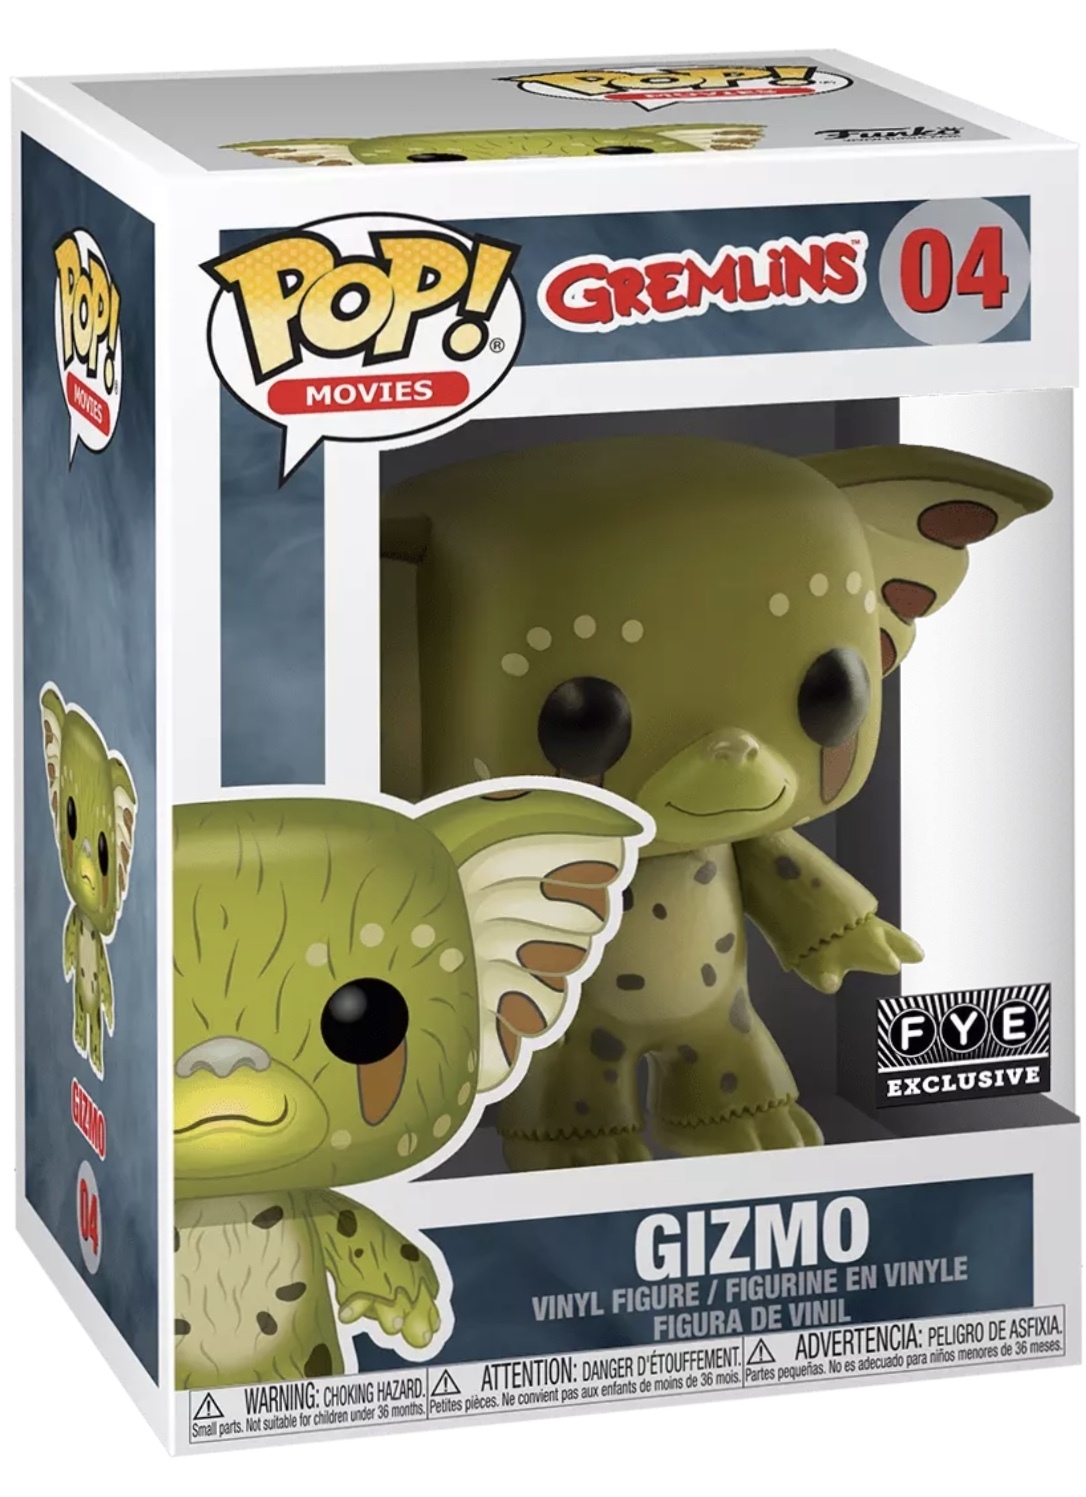 Funko POP! Vinyl Figure - Gizmo (as Gremlin) (FYE) (Mint): Sell2BBNovelties.com: TY Beanie Babies, Action Figures, Barbies, Cards Toys selling online